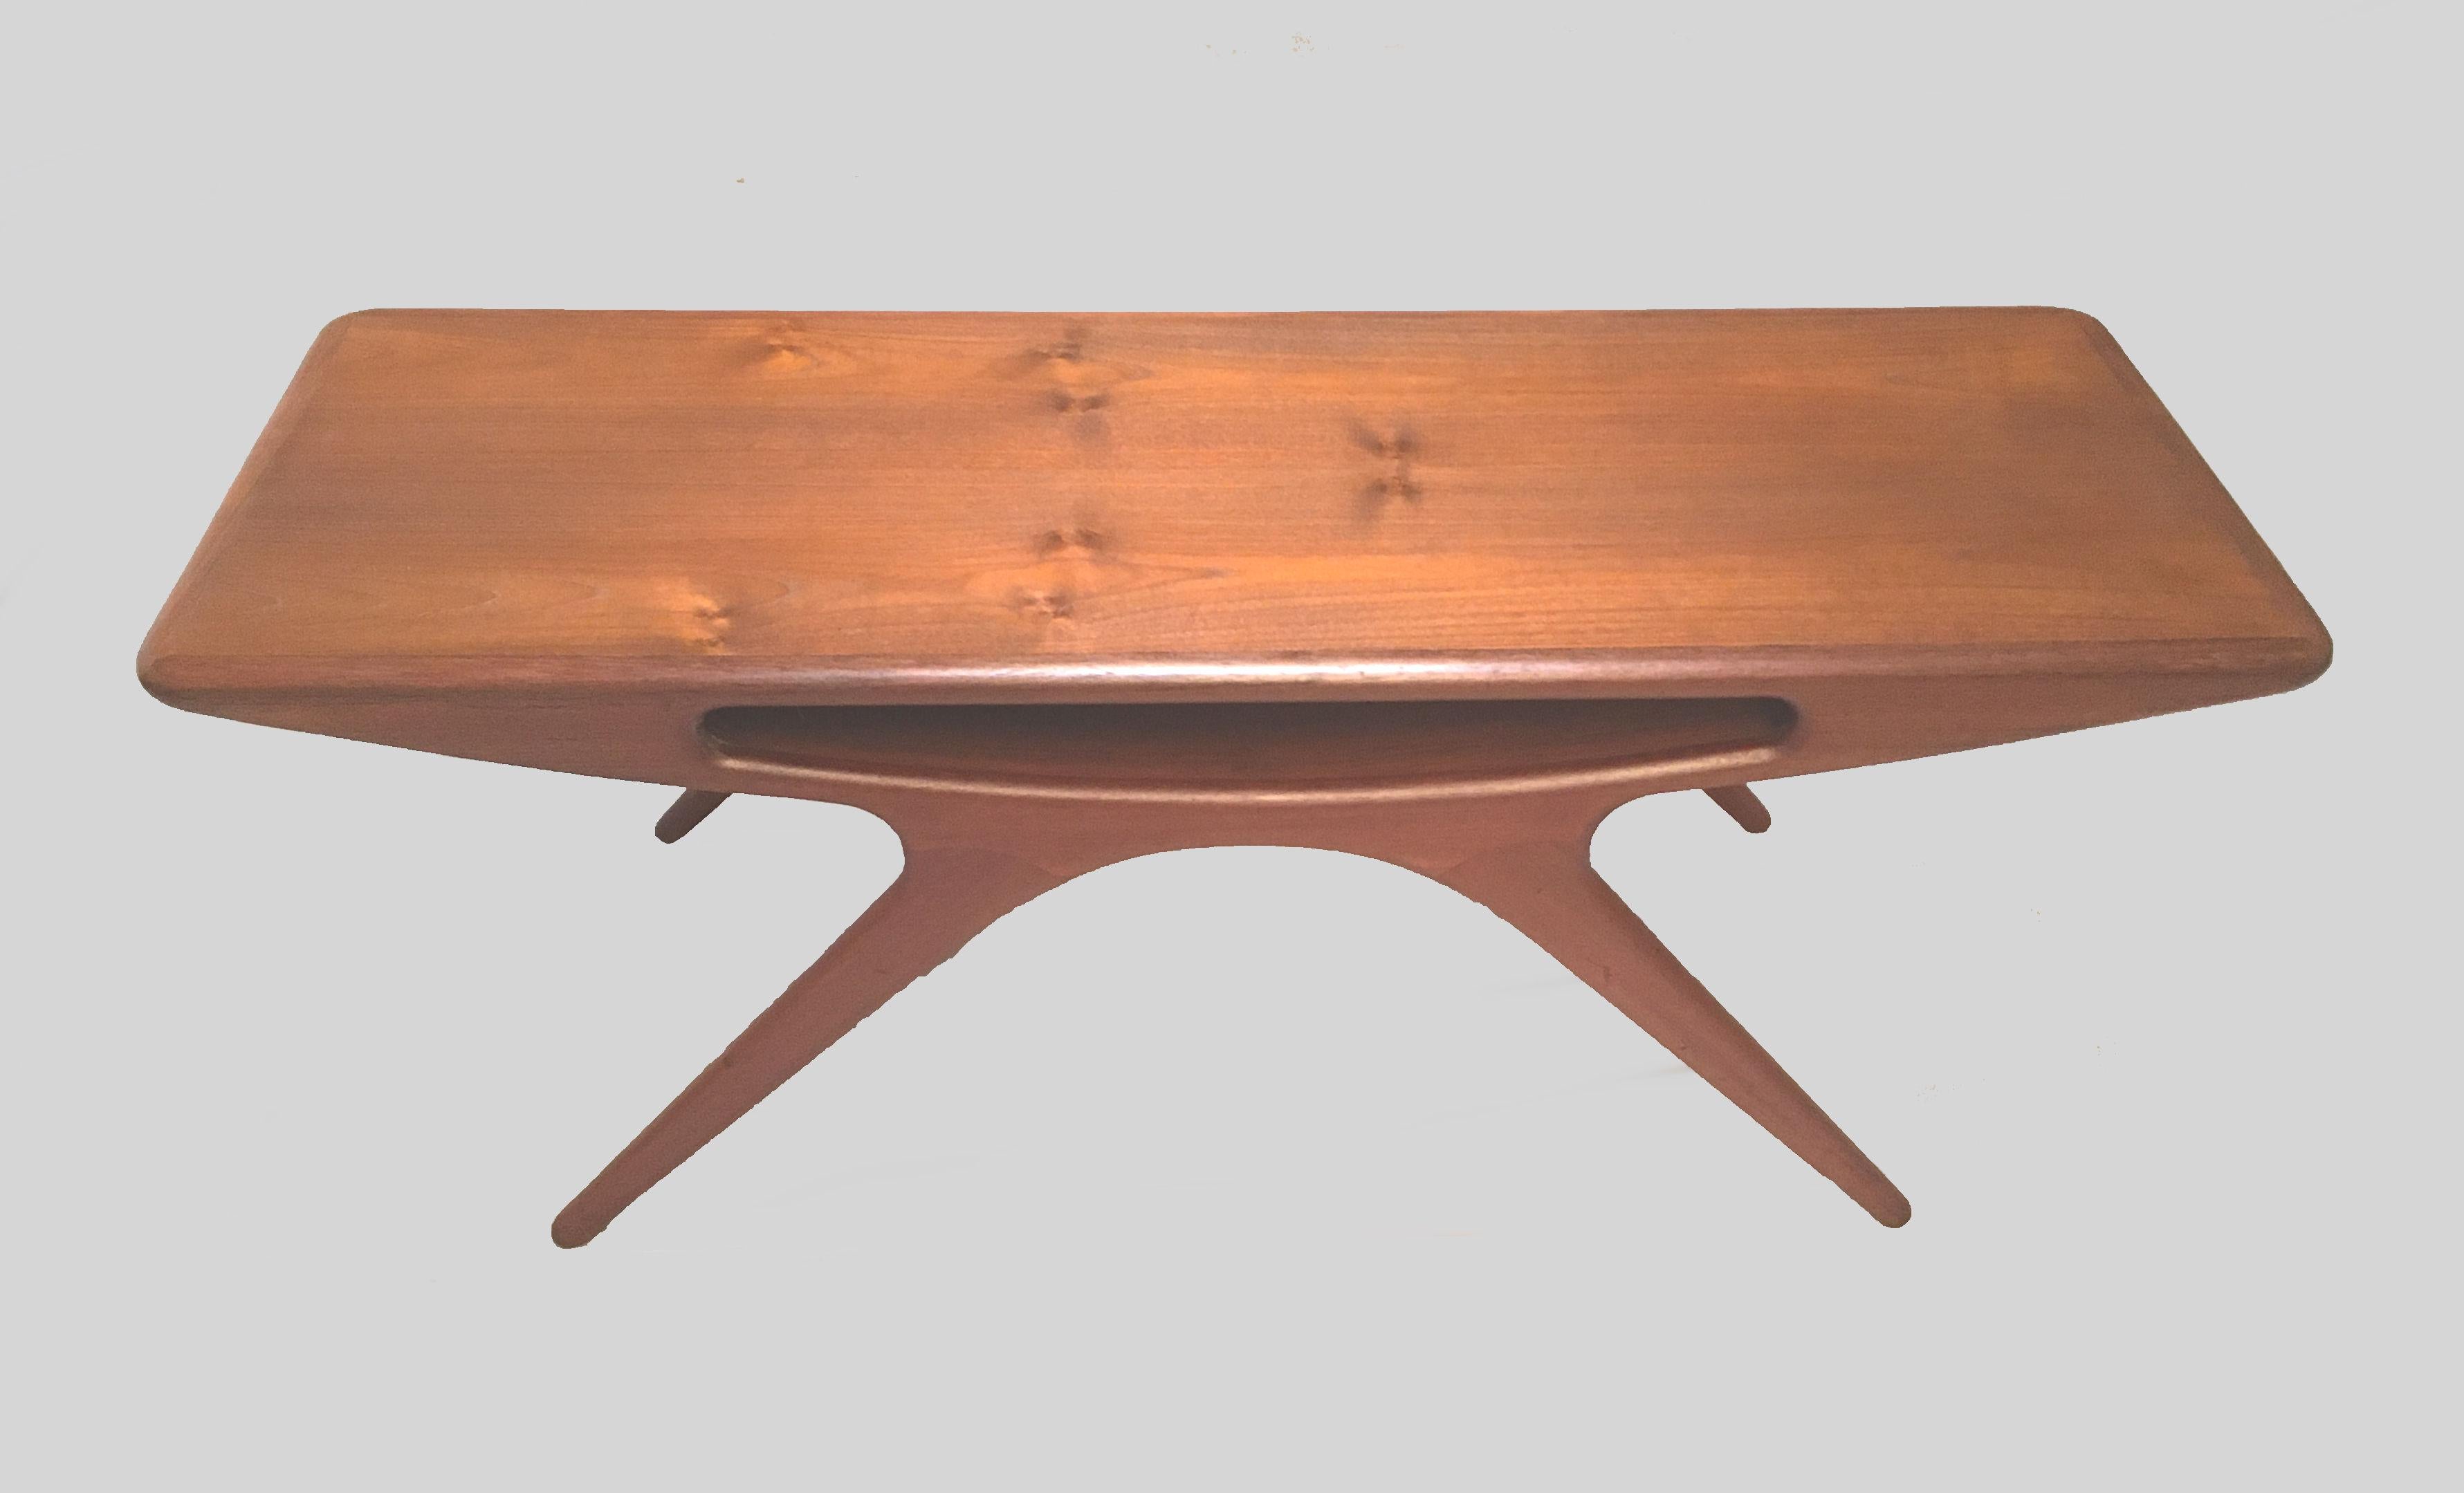 Fully Restored Danish Johannes Andersen Coffee Table in Teak by CFC Silkeborg

The iconic classic 'The smile' coffee table, was designed by Johannes Andersen in Denmark in 1957 
and manufactured in the late 1950s / 1960s by CFC Silkeborg, 

The well